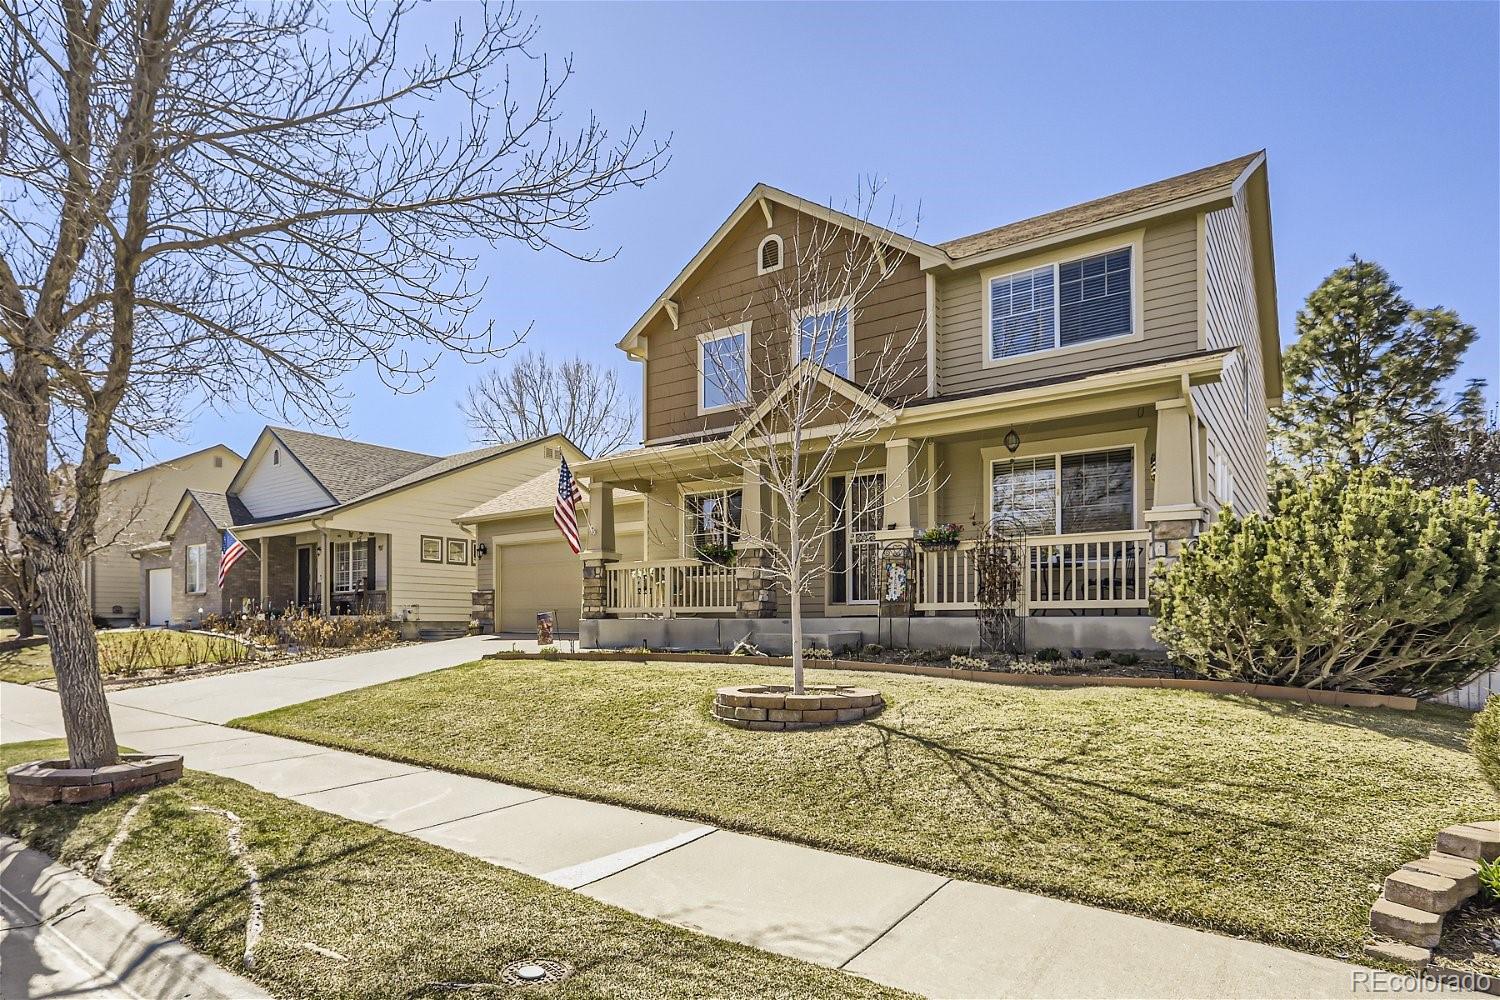 11395  kingston street, Commerce City sold home. Closed on 2024-04-26 for $605,000.